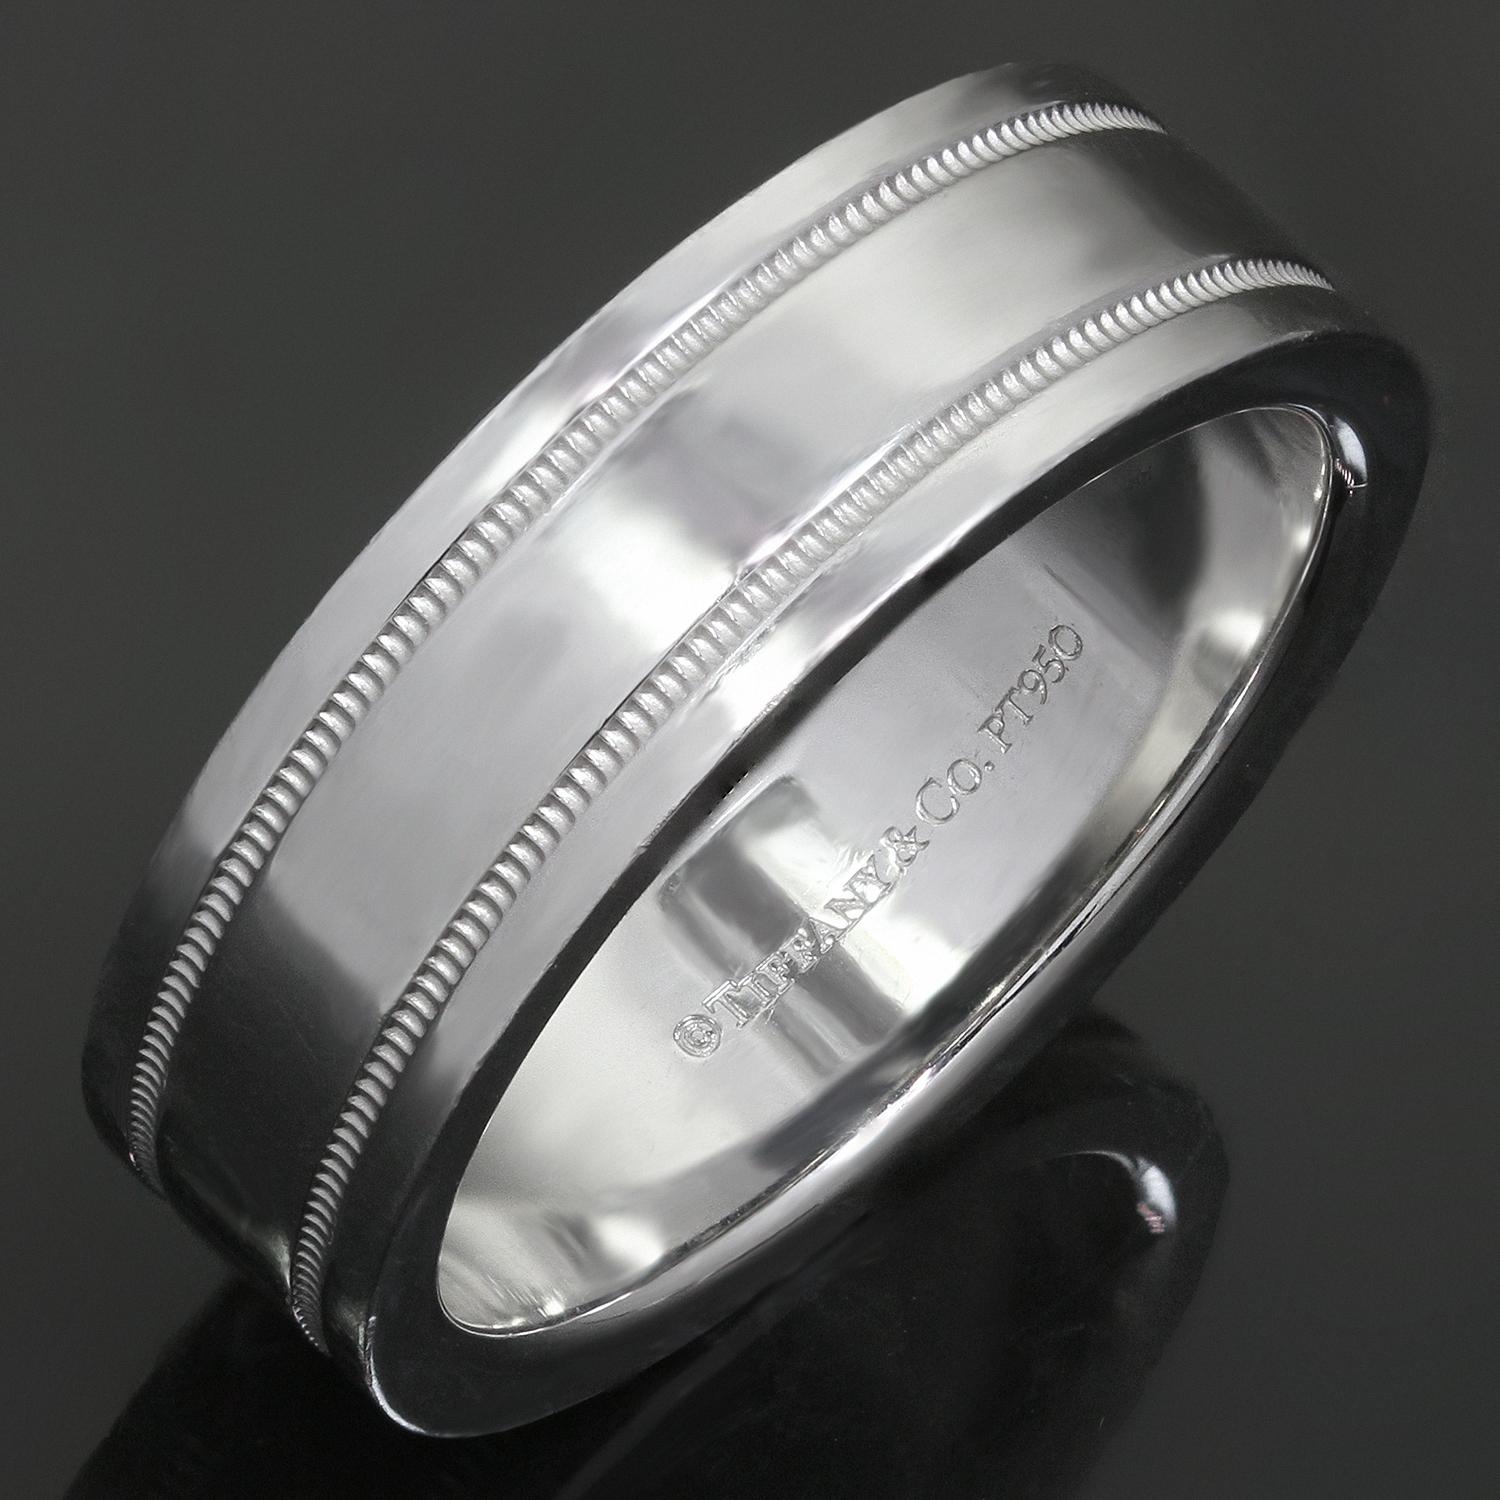 This fabulous Tiffany & Co. unisex wedding band is crafted in fine platinum and elegantly accented with milgrain edges. Classic and timeless.  Made in United States circa 2010s. Measurements: 0.23